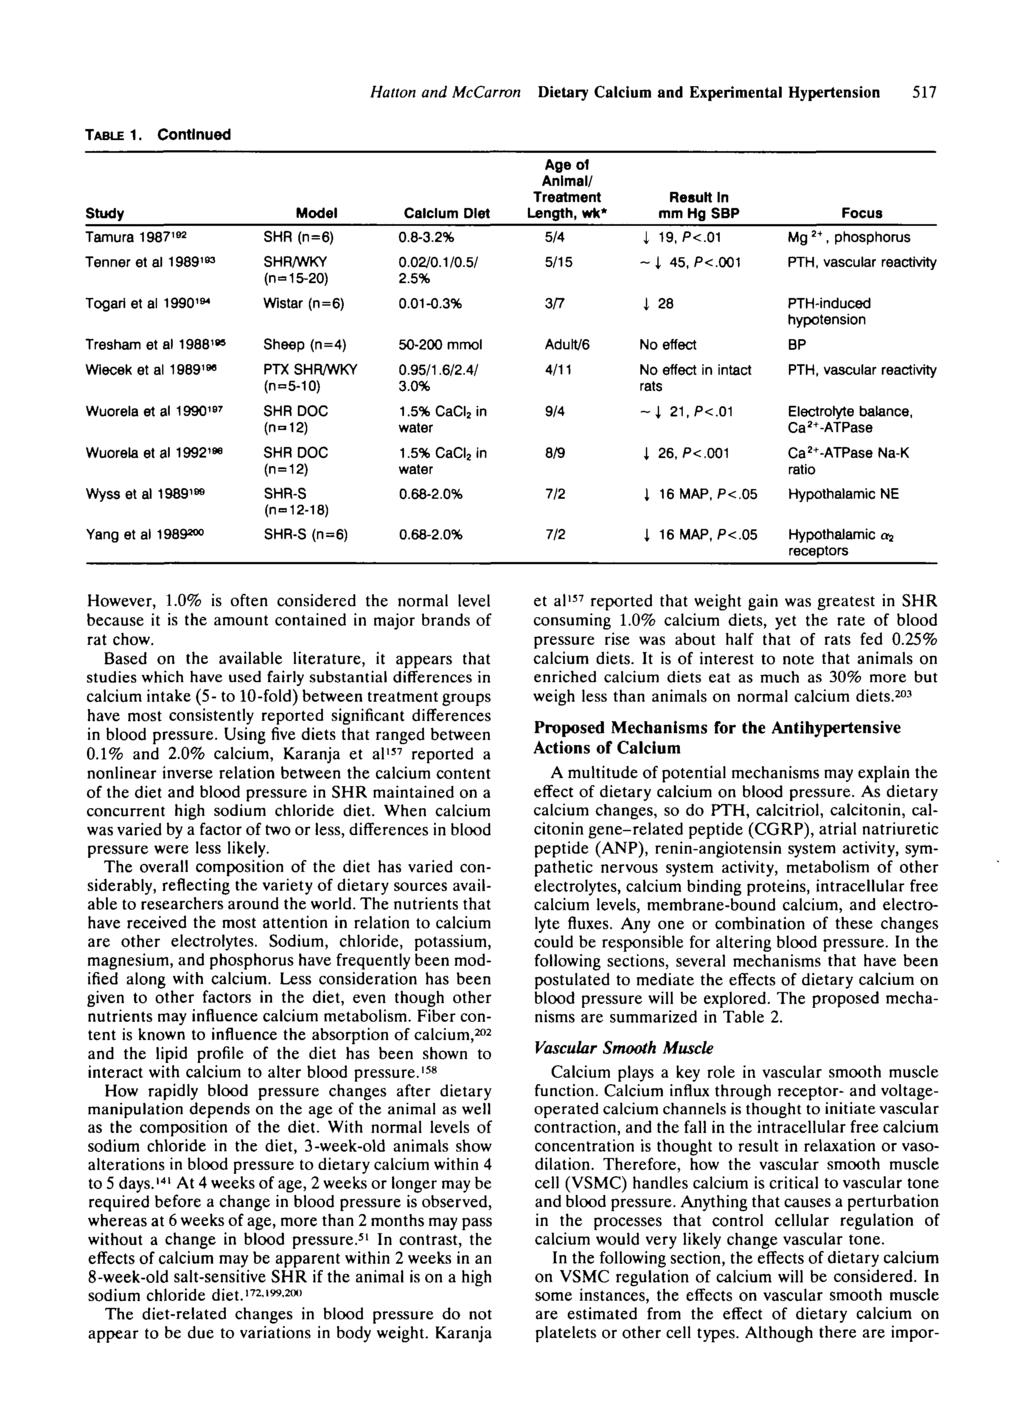 Hatton and McCarron Dietary Calcium and Experimental Hypertension 517 TABLE 1. Continued Vascular Smooth Muscle Calcium plays a key role in vascular smooth muscle function.